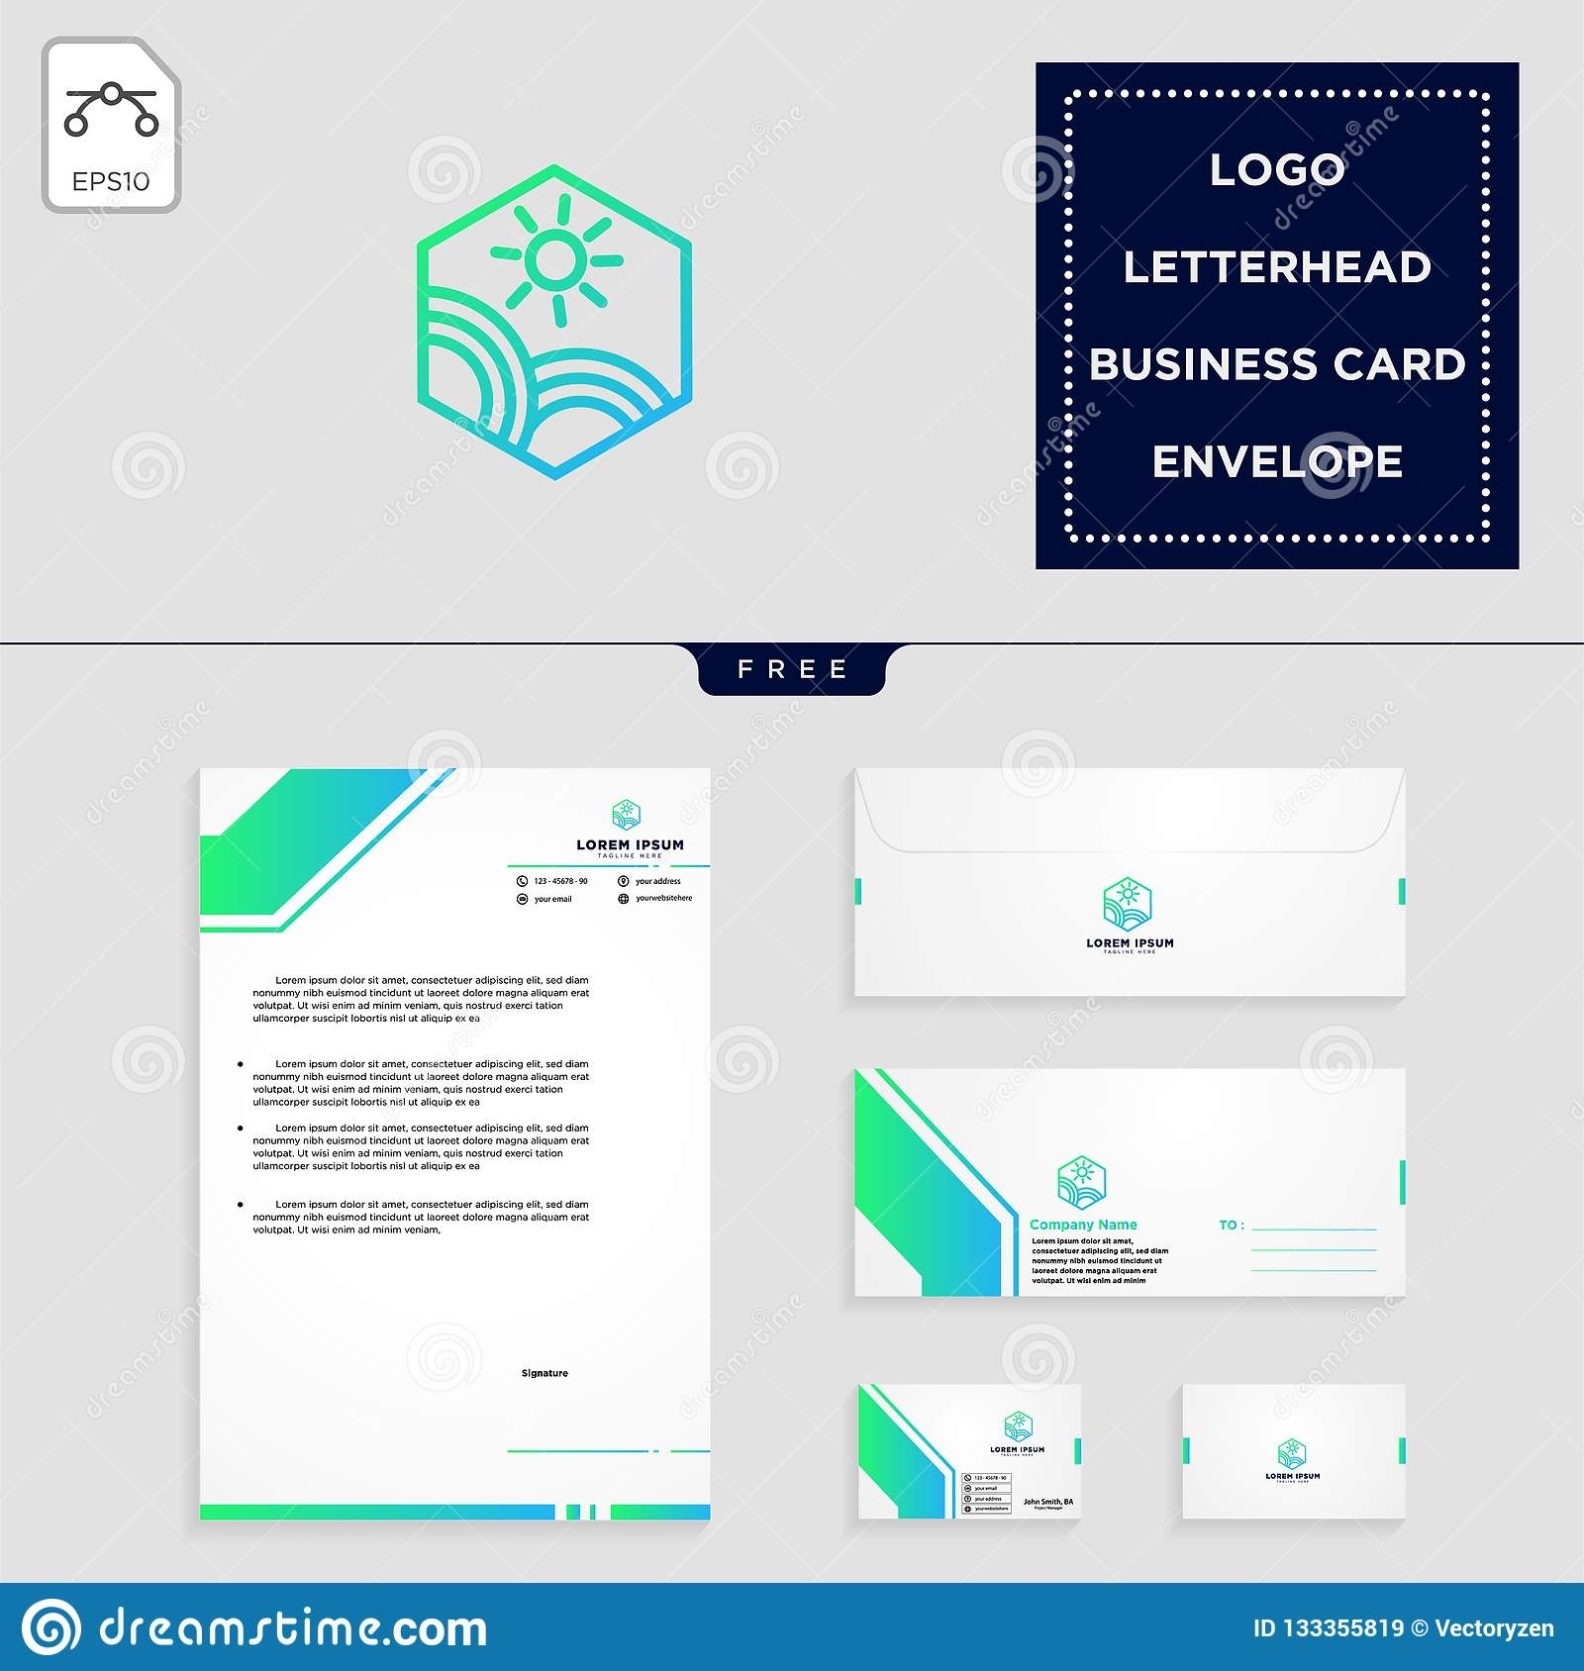 Holidays Logo Template And Free Letterhead, Envelope, Business Card In Business Card Letterhead Envelope Template